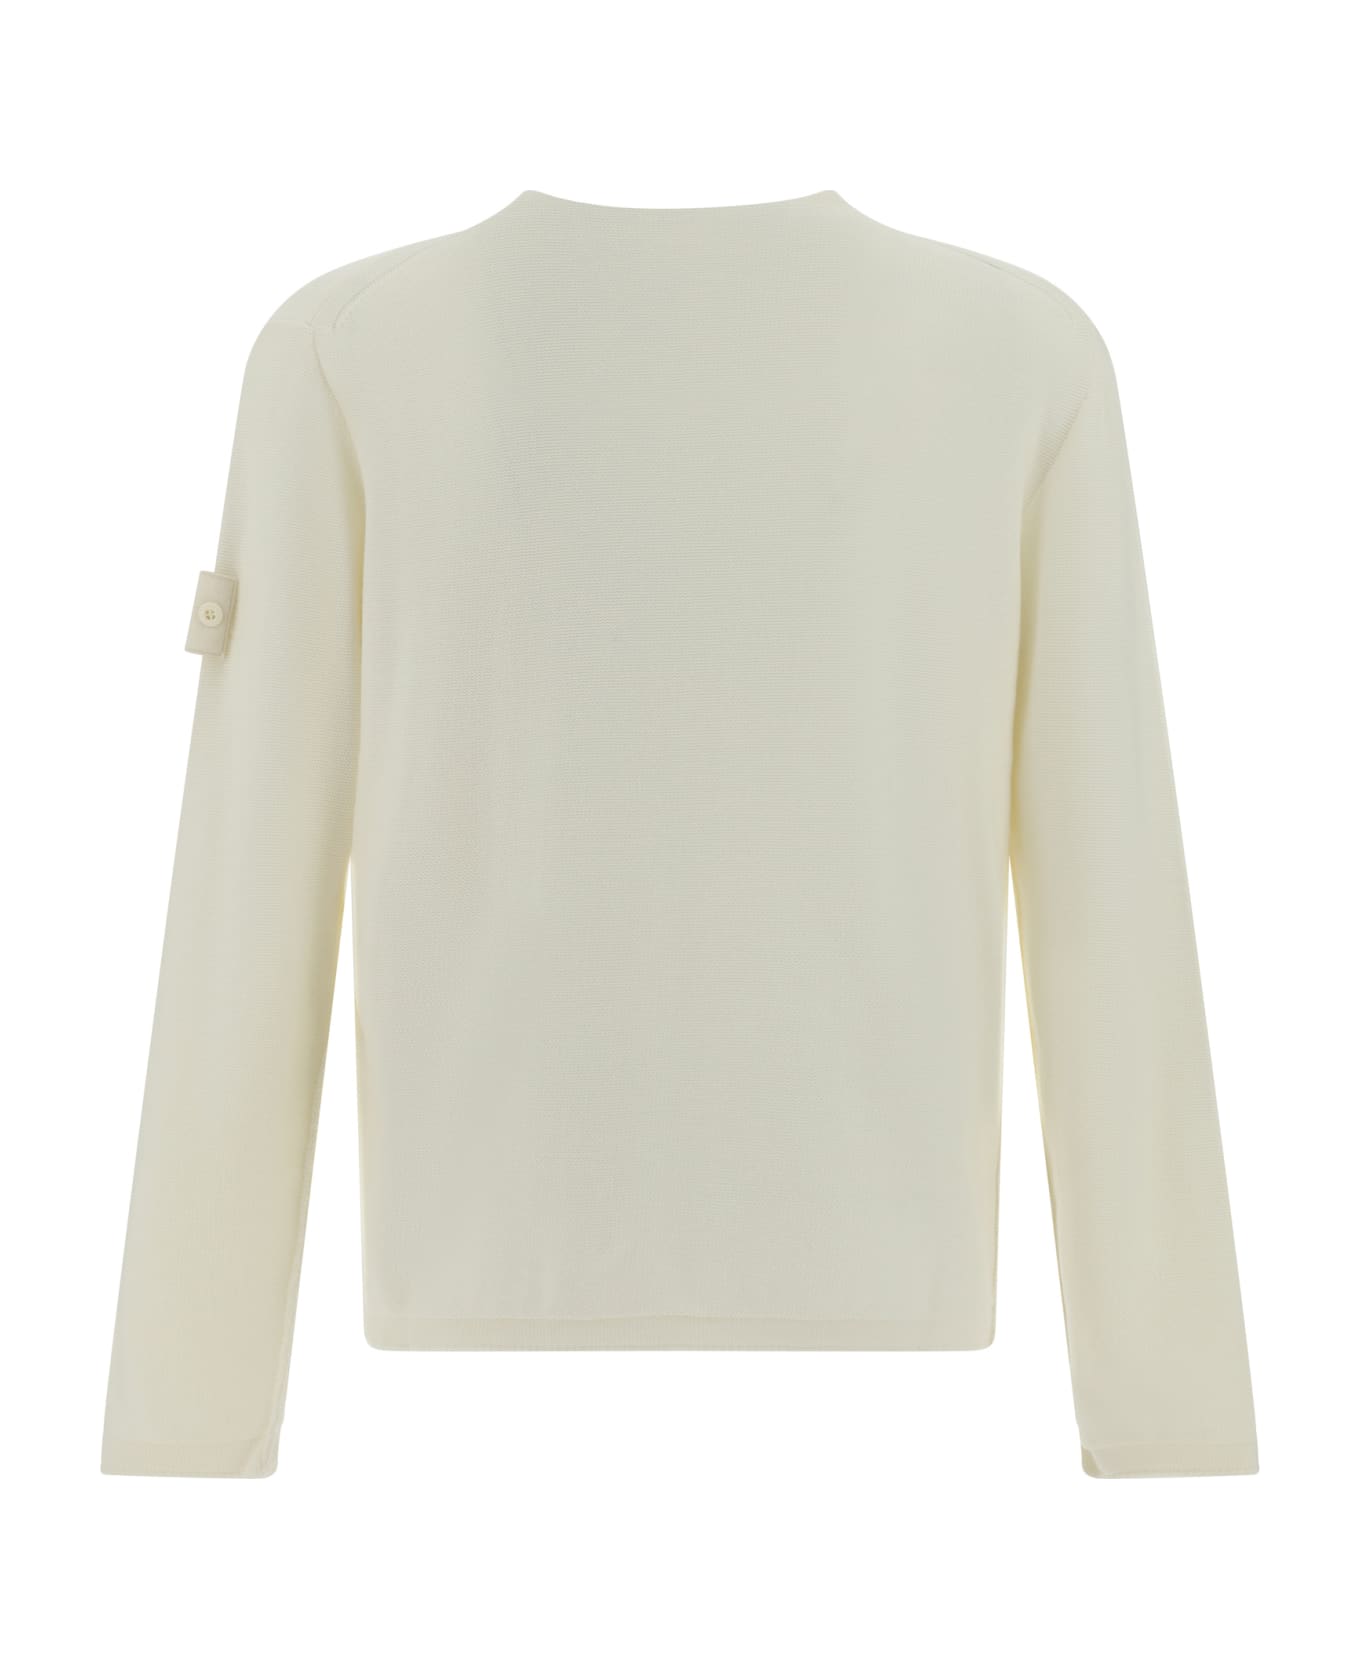 Stone Island Ghost Sweater - Bco Naturale